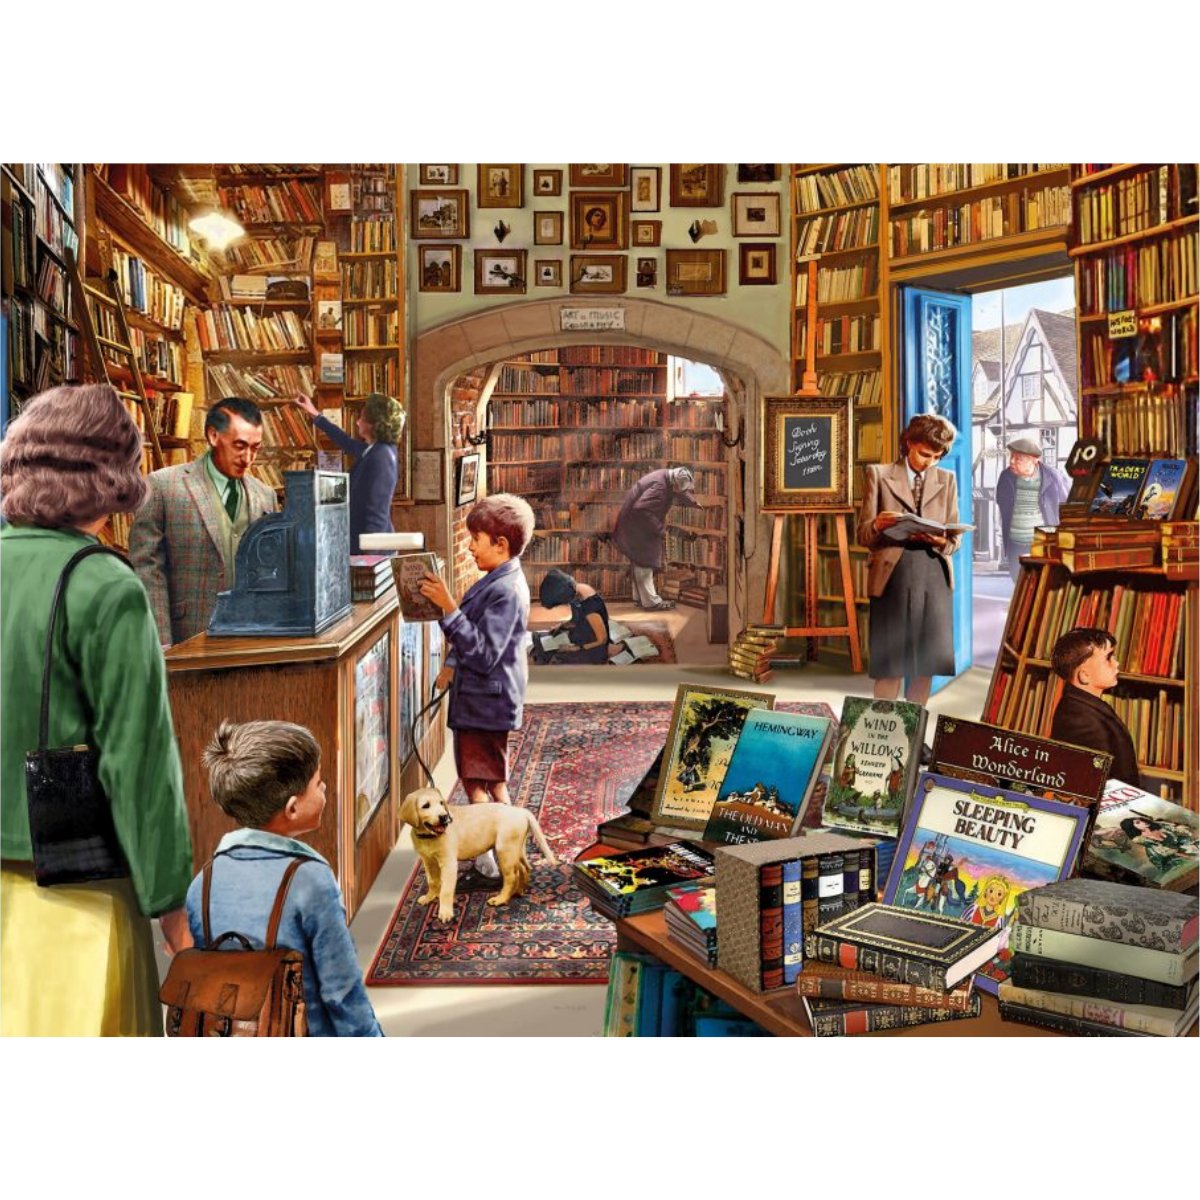 Ye Olde Book Shoppe Jigsaw Puzzle (1000 Pieces) - Phillips Hobbies